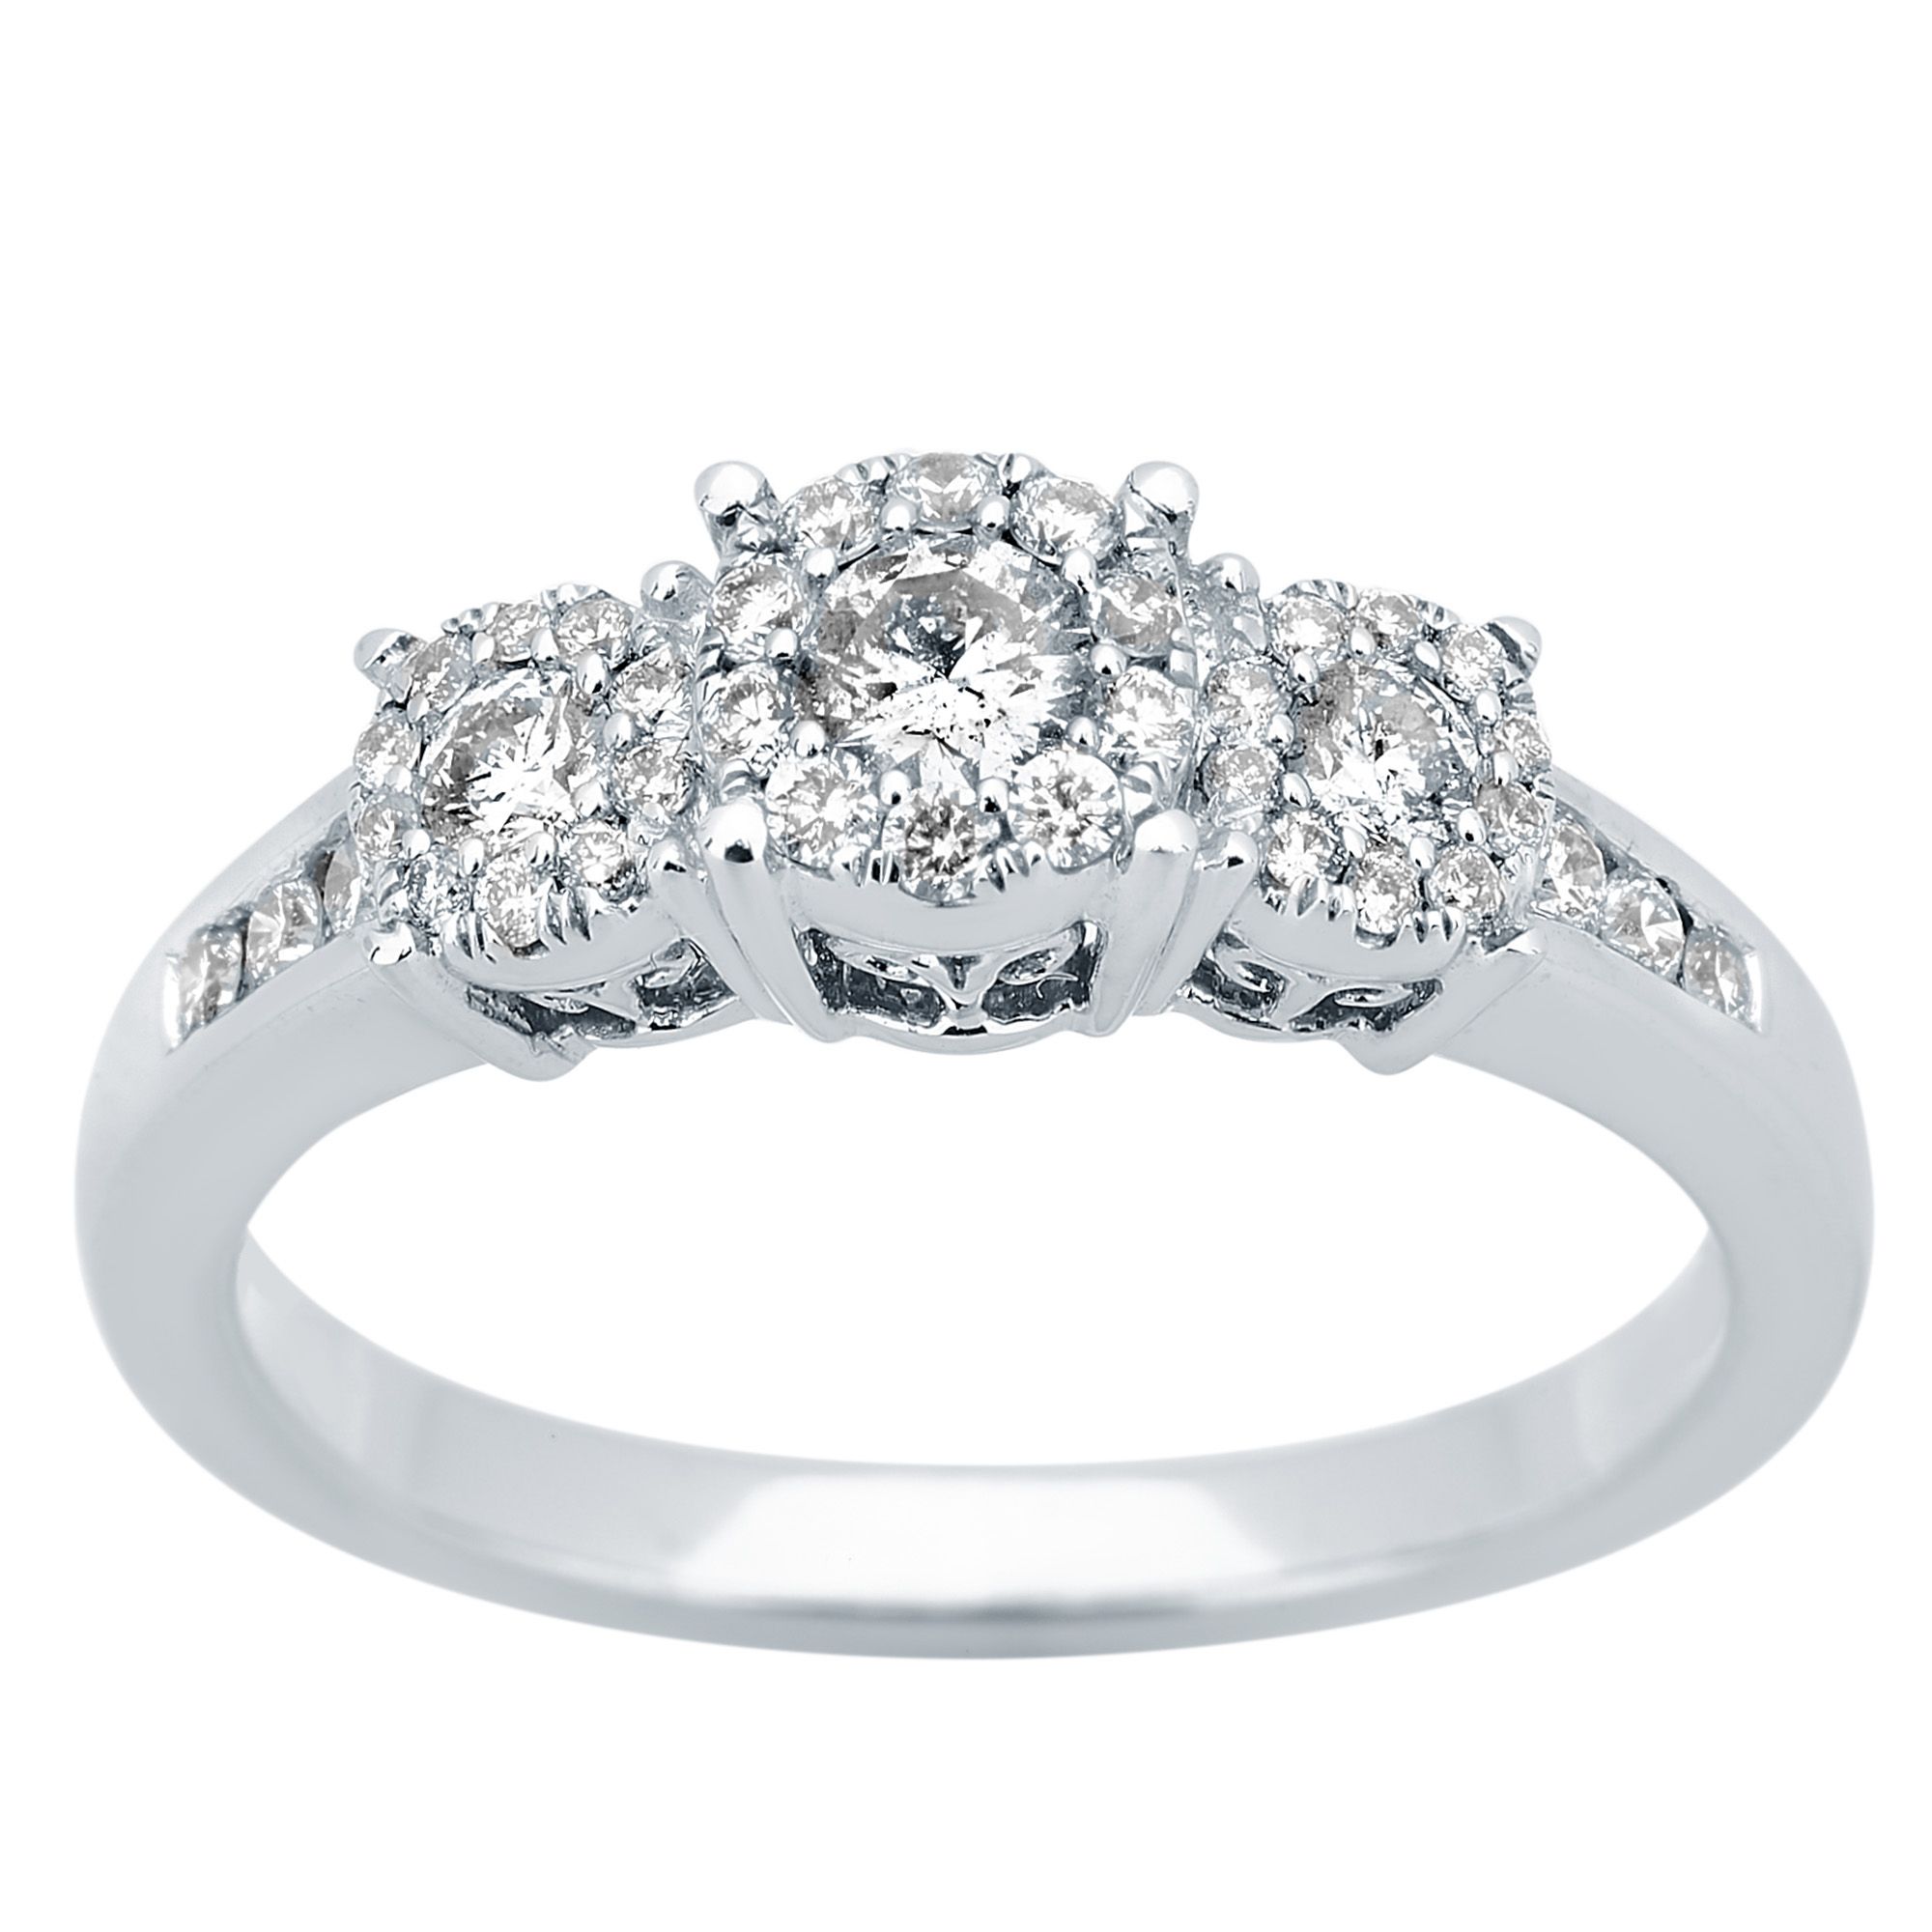 .50 ct. t.w. Diamond Engagement Ring in 14k White Gold